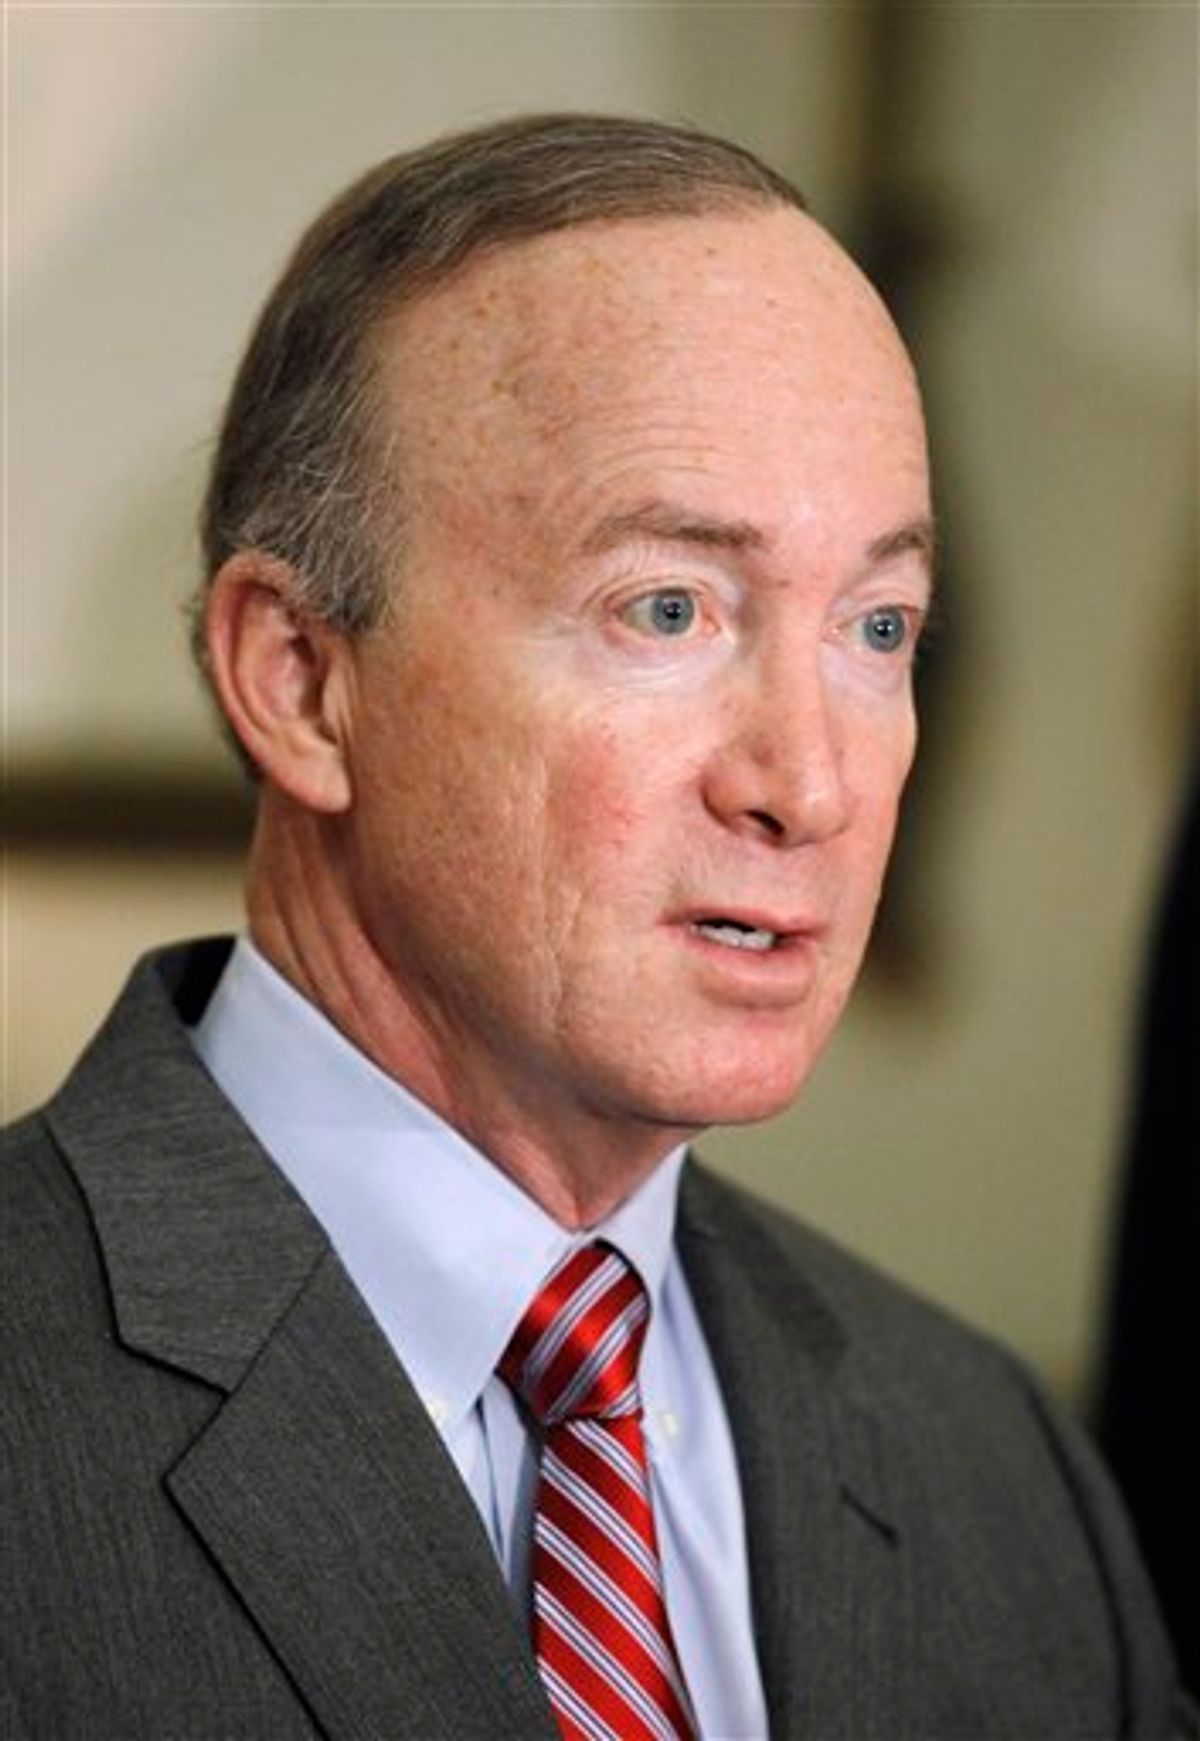 FILE - In this April 15, 2011 file photo, Indiana Gov. Mitch Daniels speaks at the Statehouse in Indianapolis.  Ready or not, the 2012 presidential campaign is under way in earnest a full 18 months before Election Day. The GOP field _ still muddy and made up of no less than a dozen people _ will become clearer in coming days as more Republicans declare they'll run or sit out _ and President Barack Obama's schedule already is packed with fundraisers and visits to states important to his re-election chances. (AP Photo/Darron Cummings, File)  (AP)